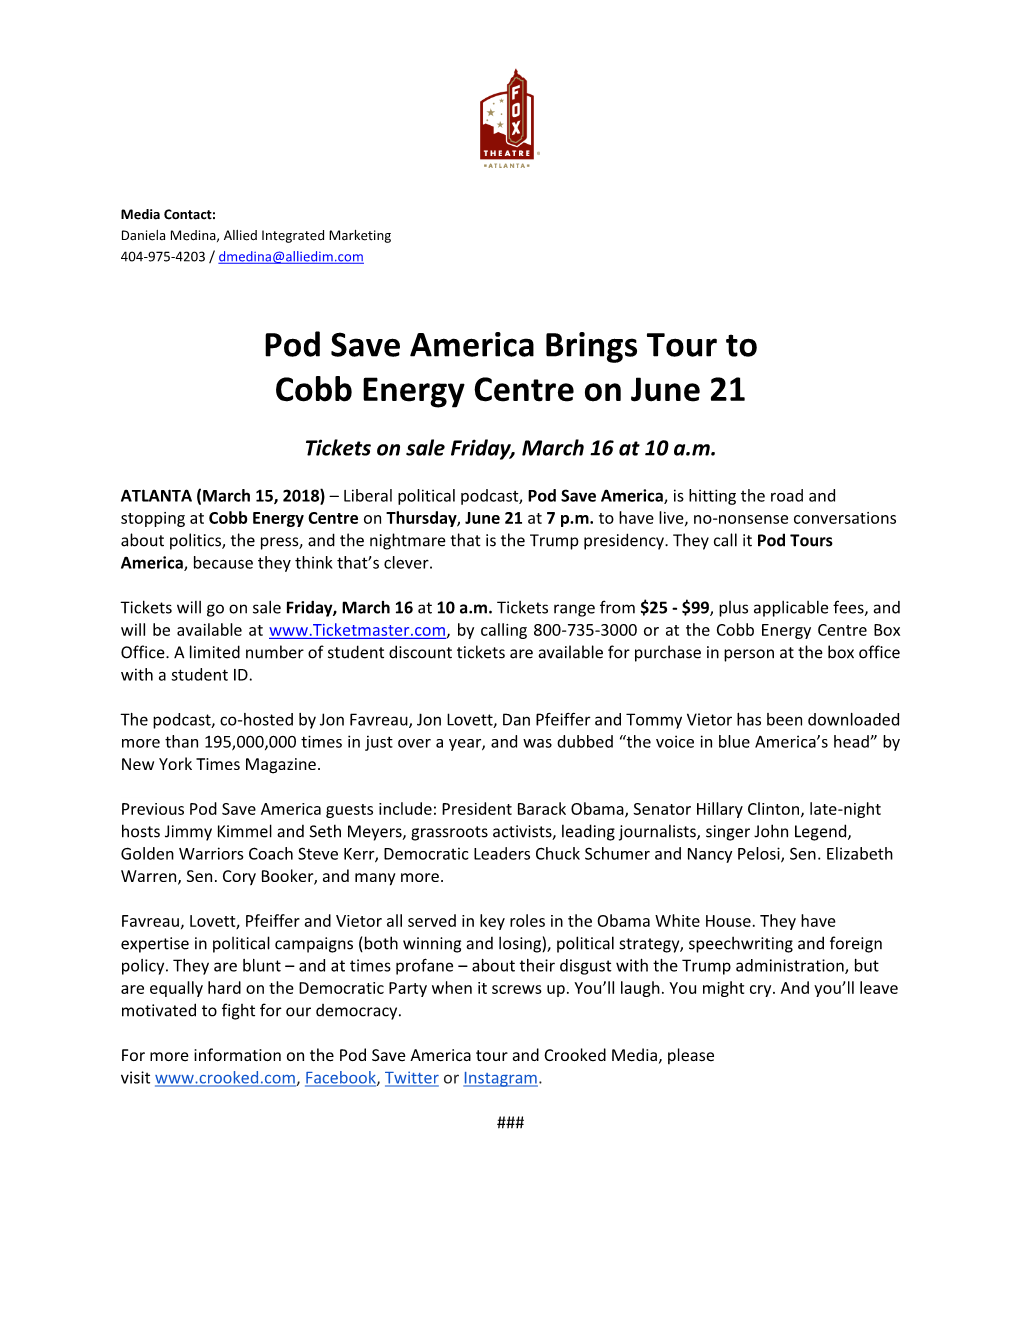 Pod Save America Brings Tour to Cobb Energy Centre on June 21